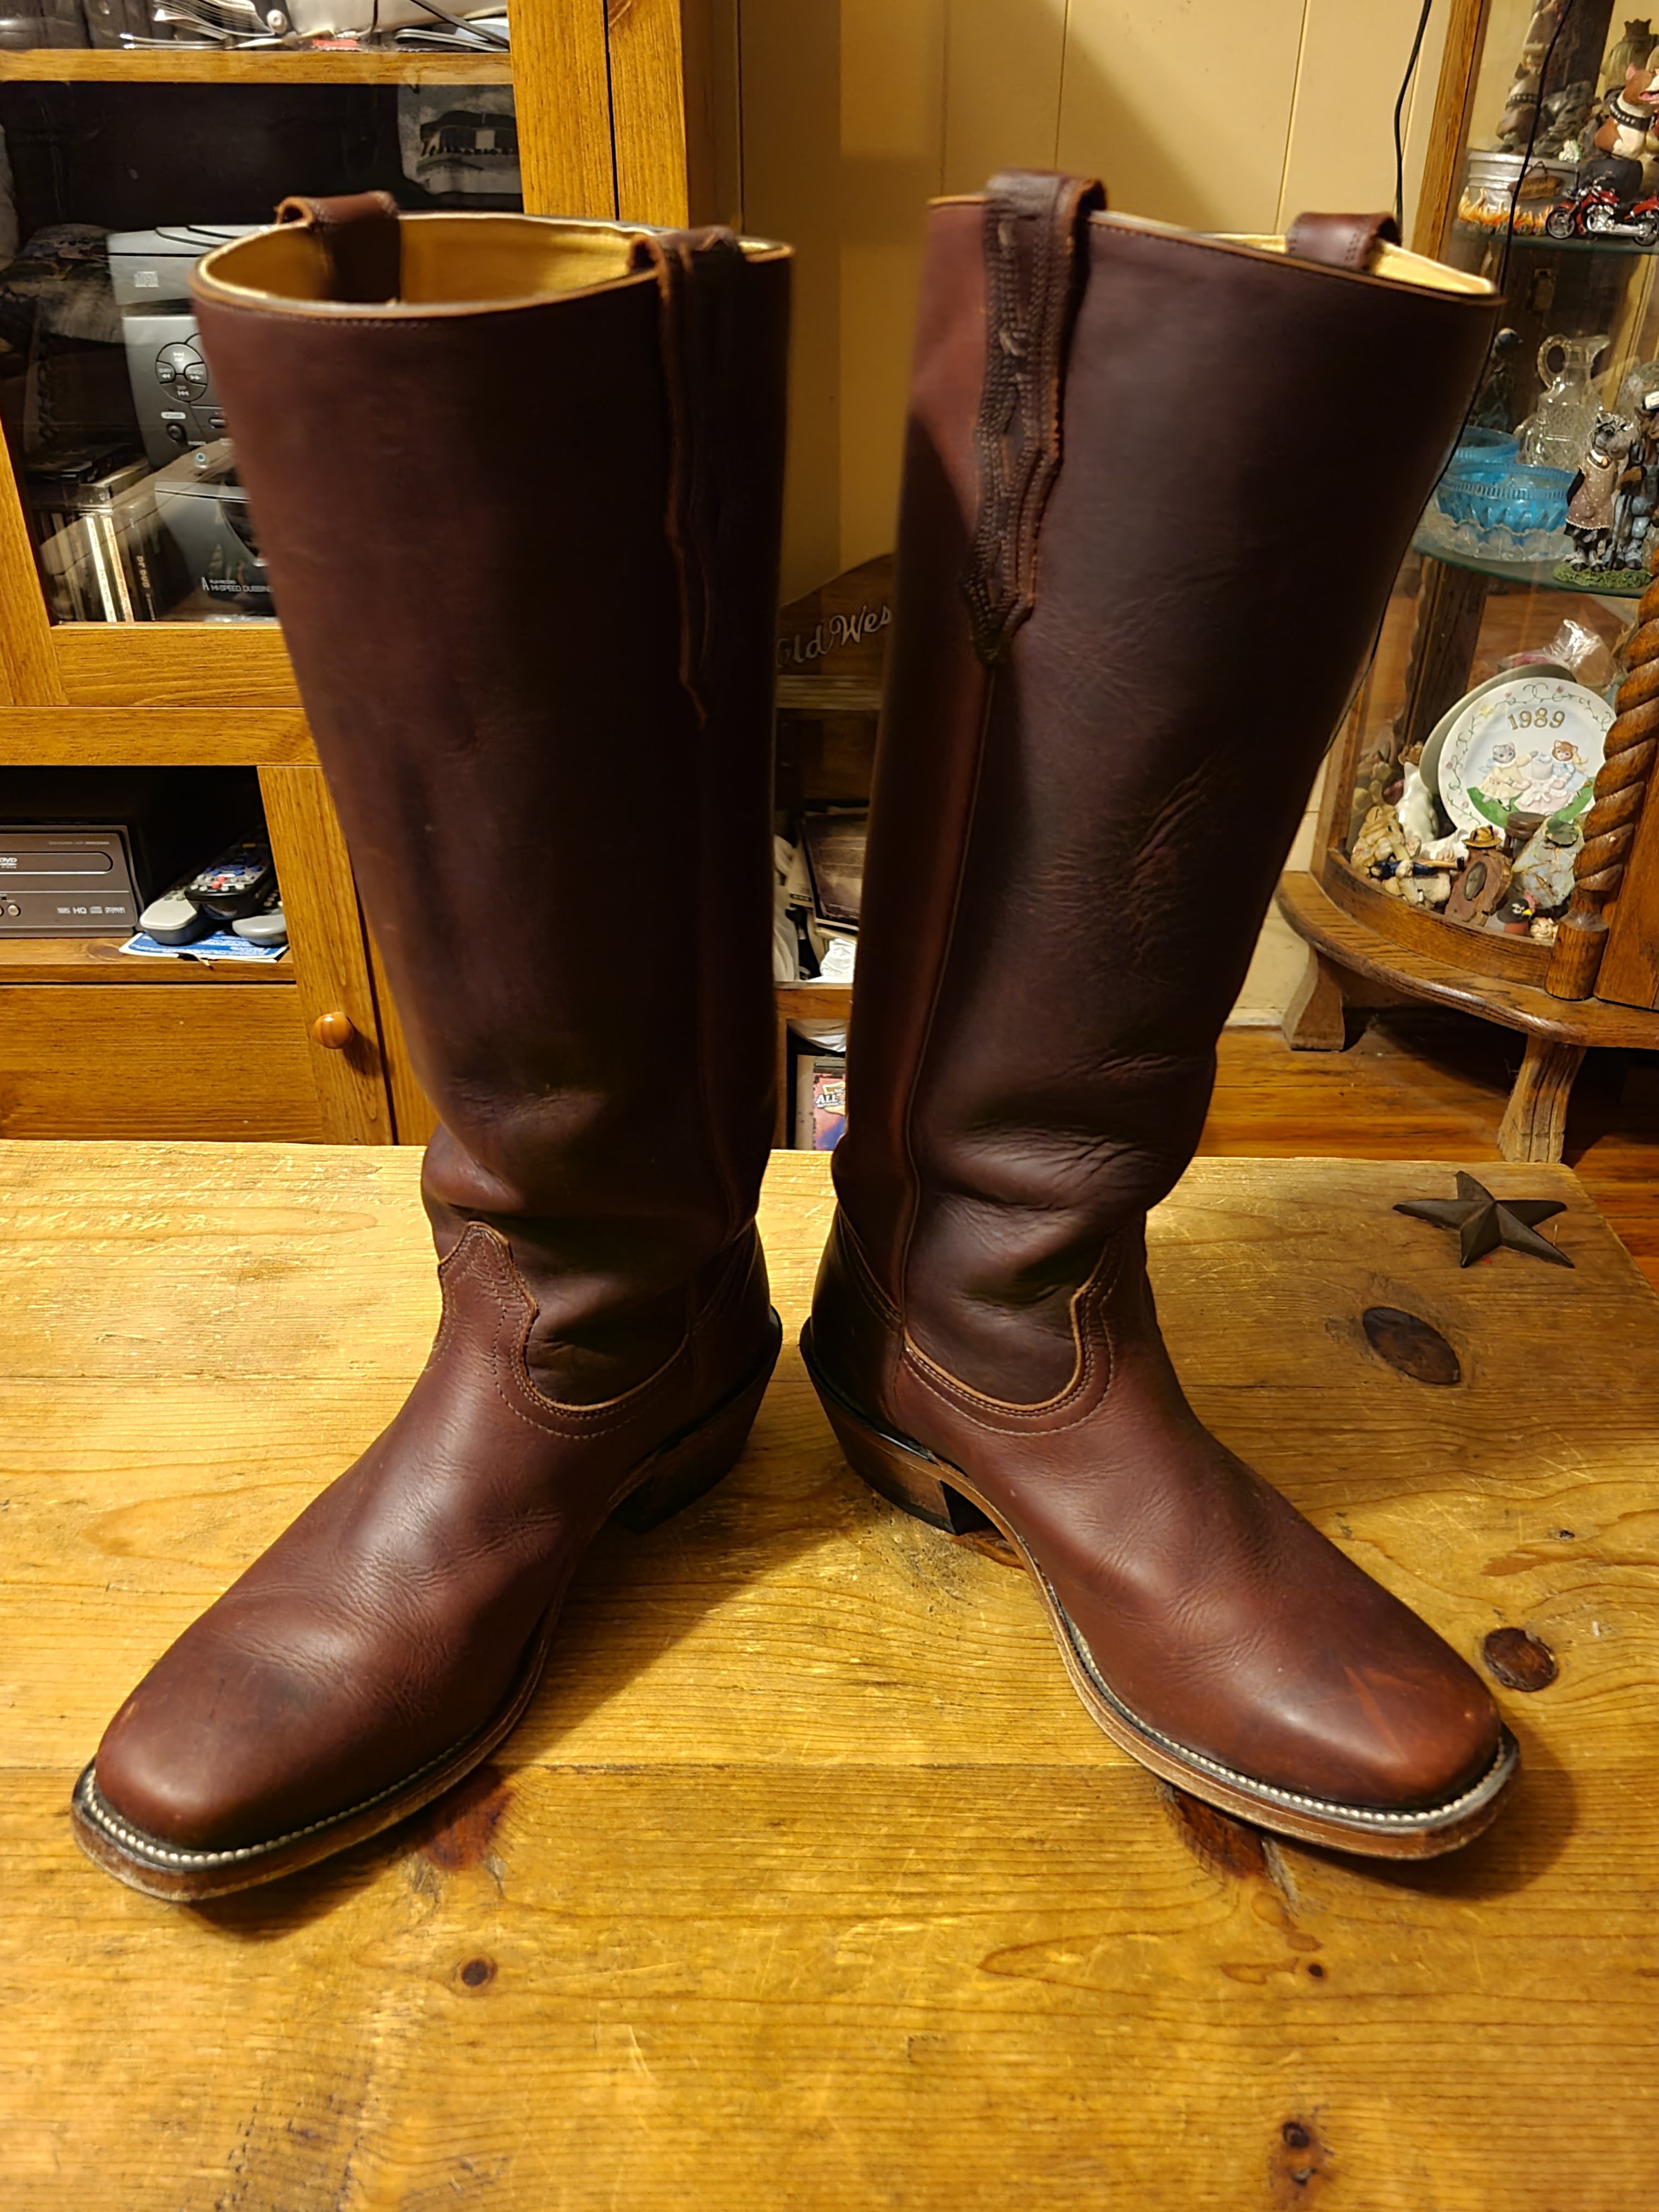 Sold. F/S Boulet Shooter Boots - SASS Wire Classifieds - SASS Wire Forum